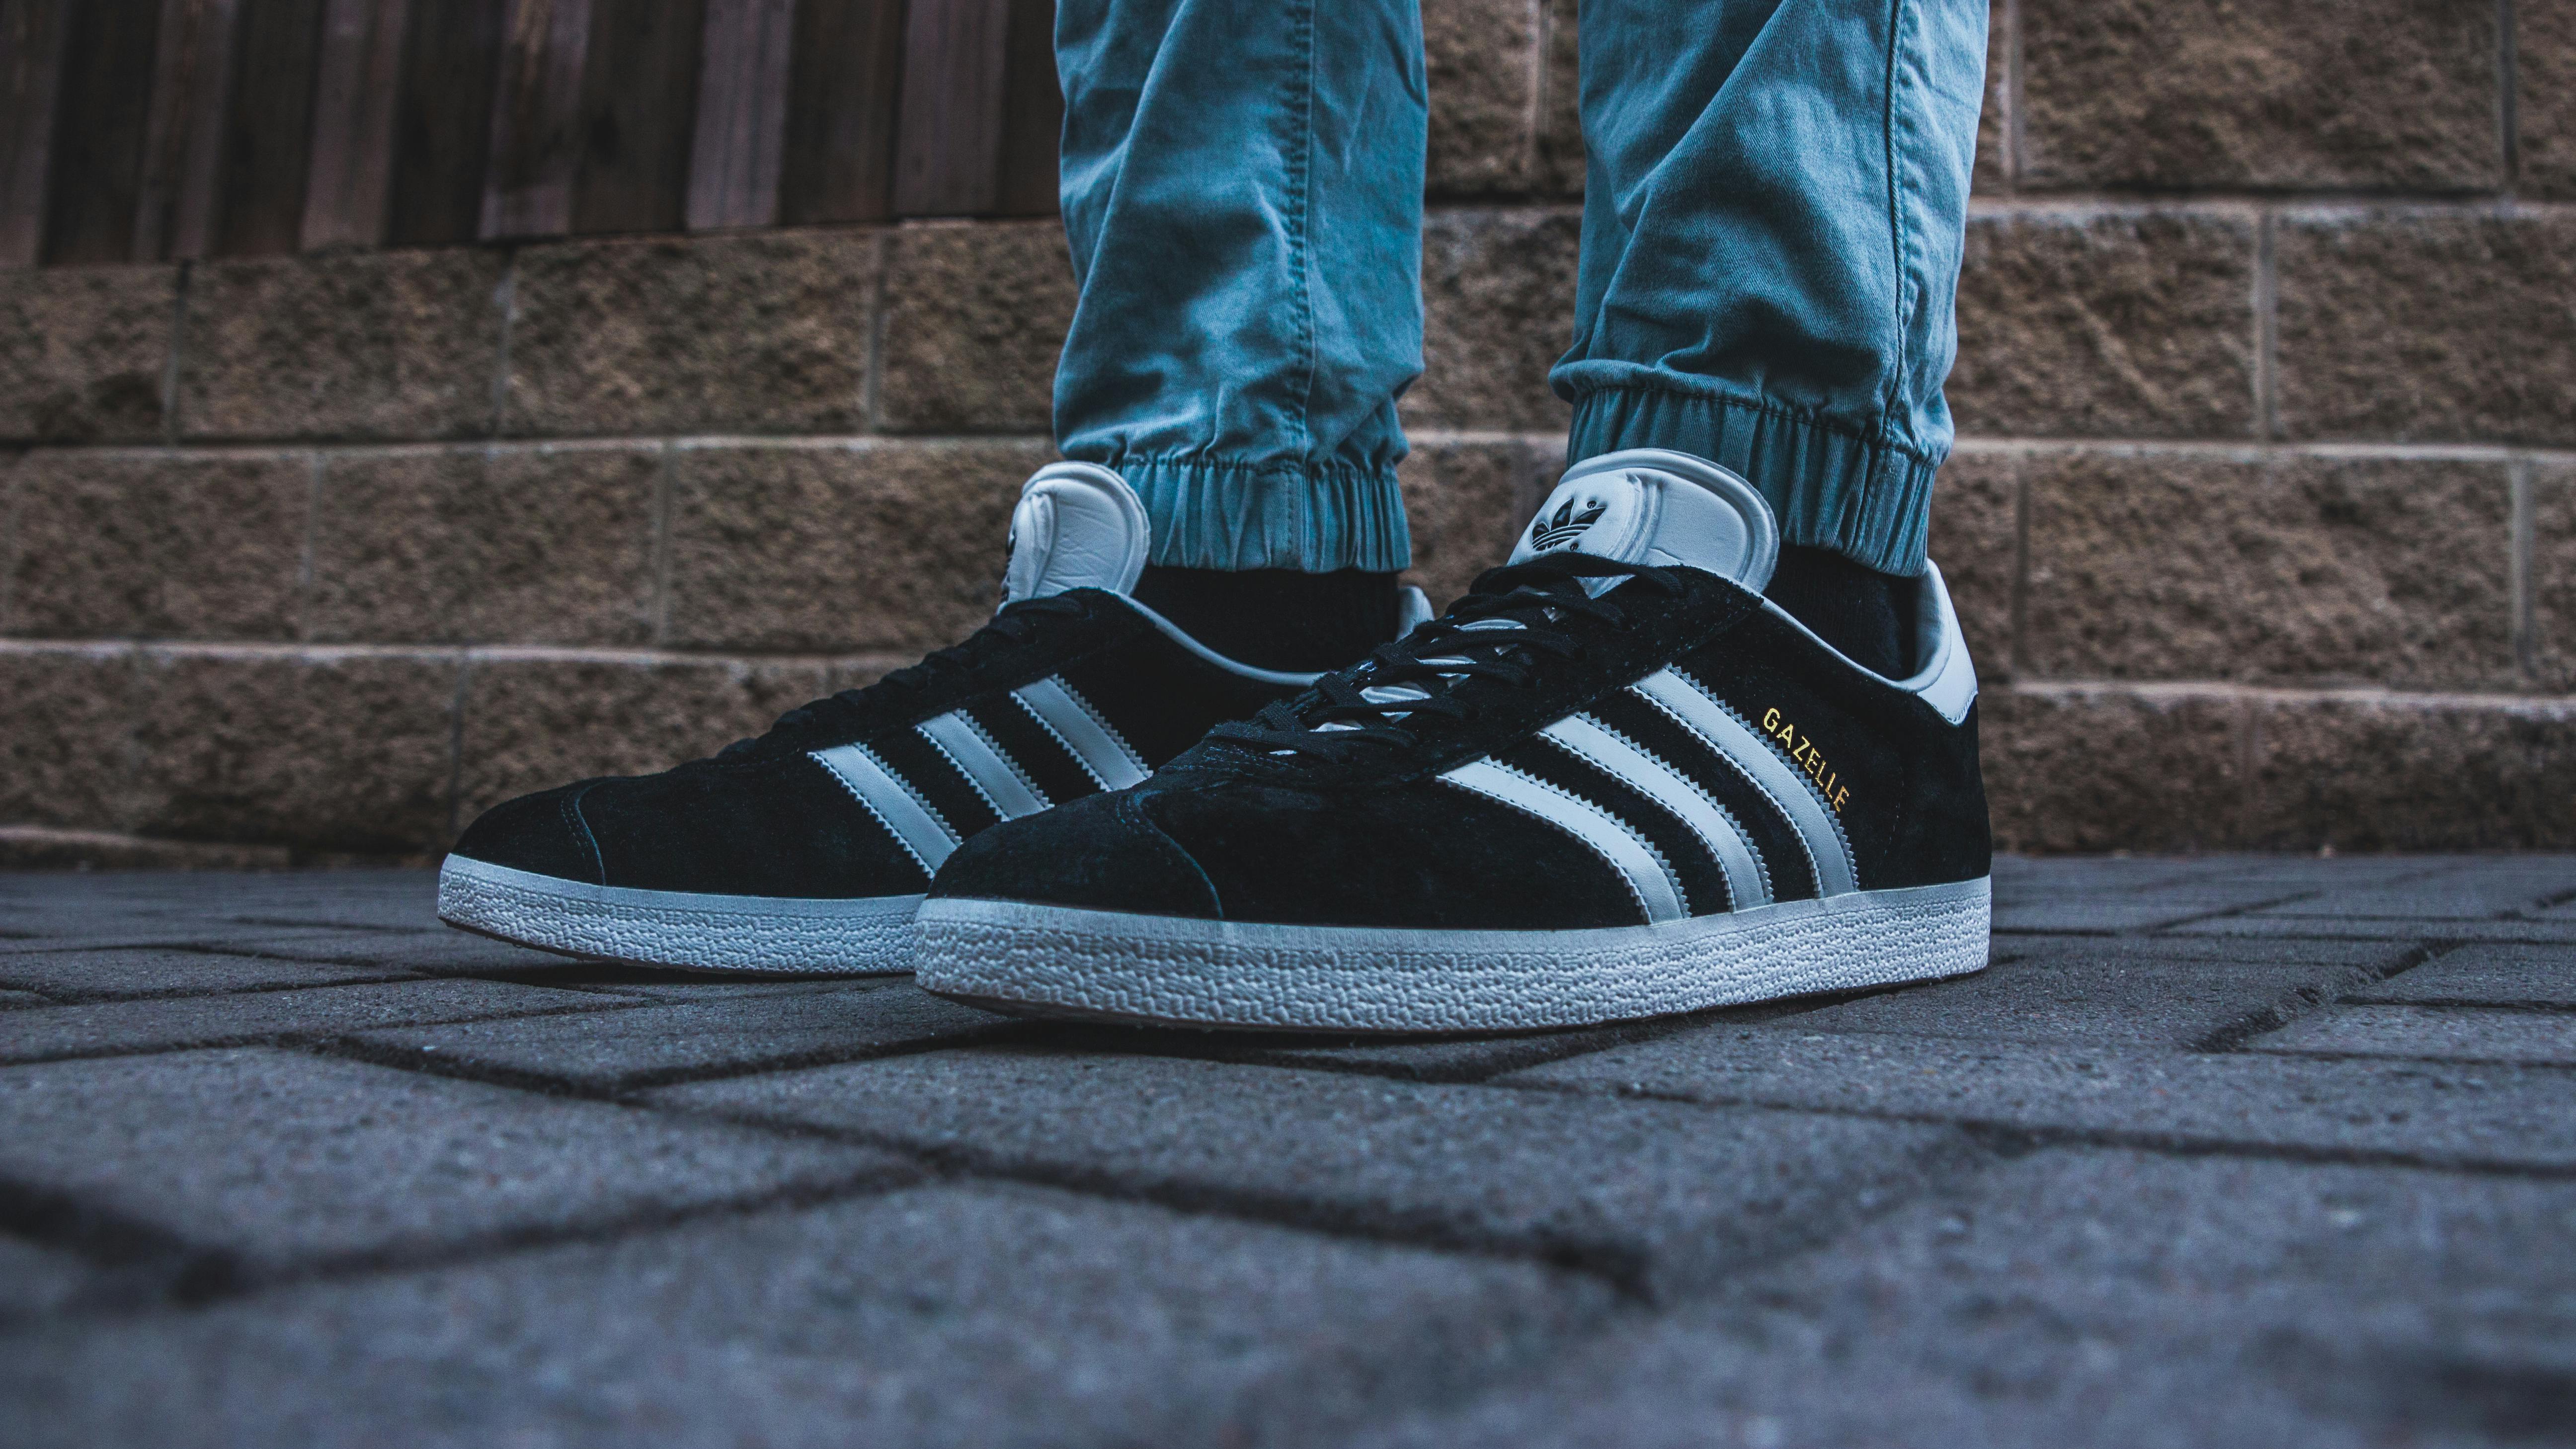 Person Wearing Pair of Black-and-white Adidas Gazelle · Free Stock Photo